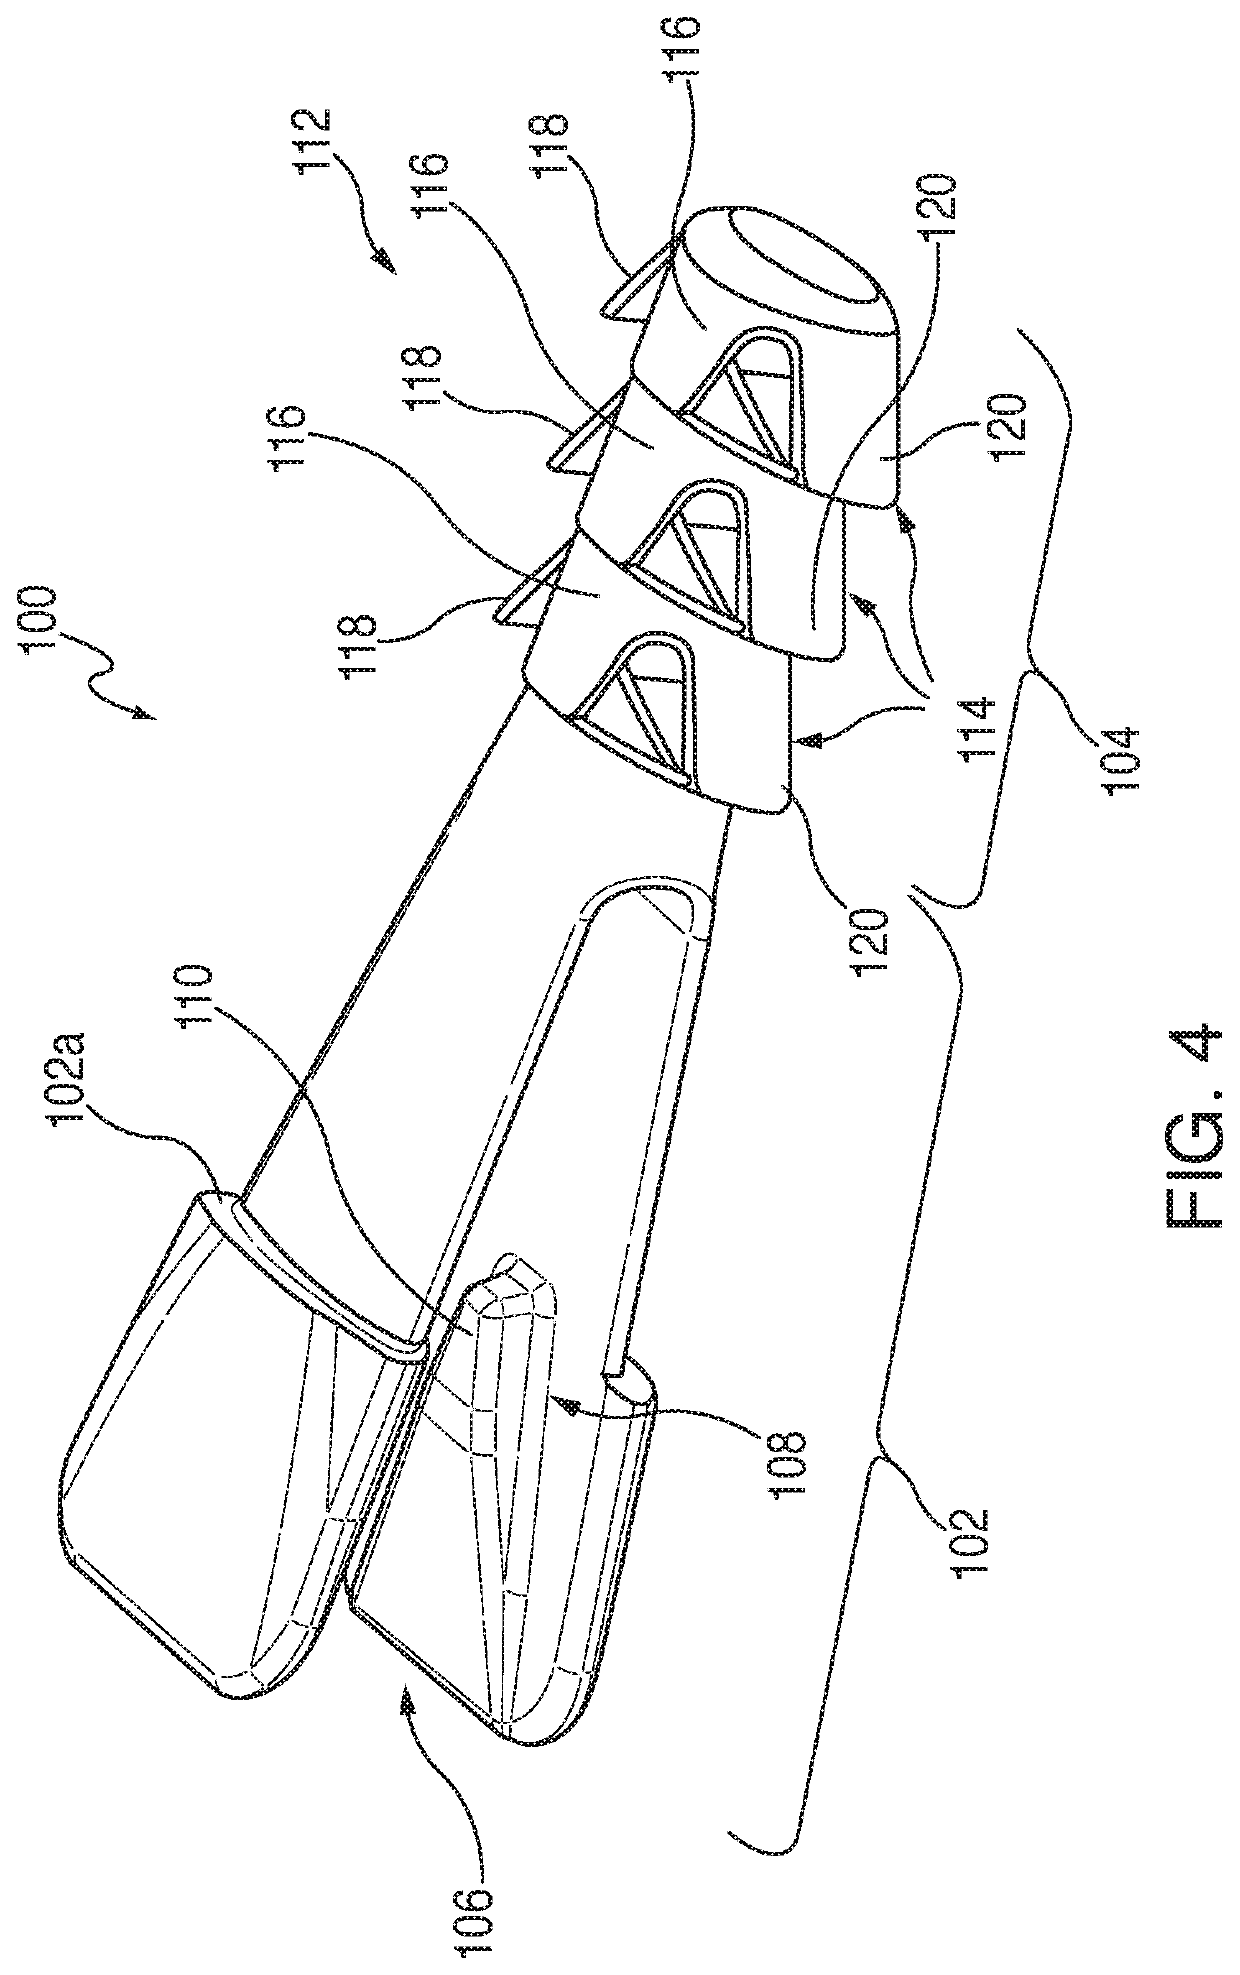 Connector clip for securing an introducer to a surgical fastener applying apparatus